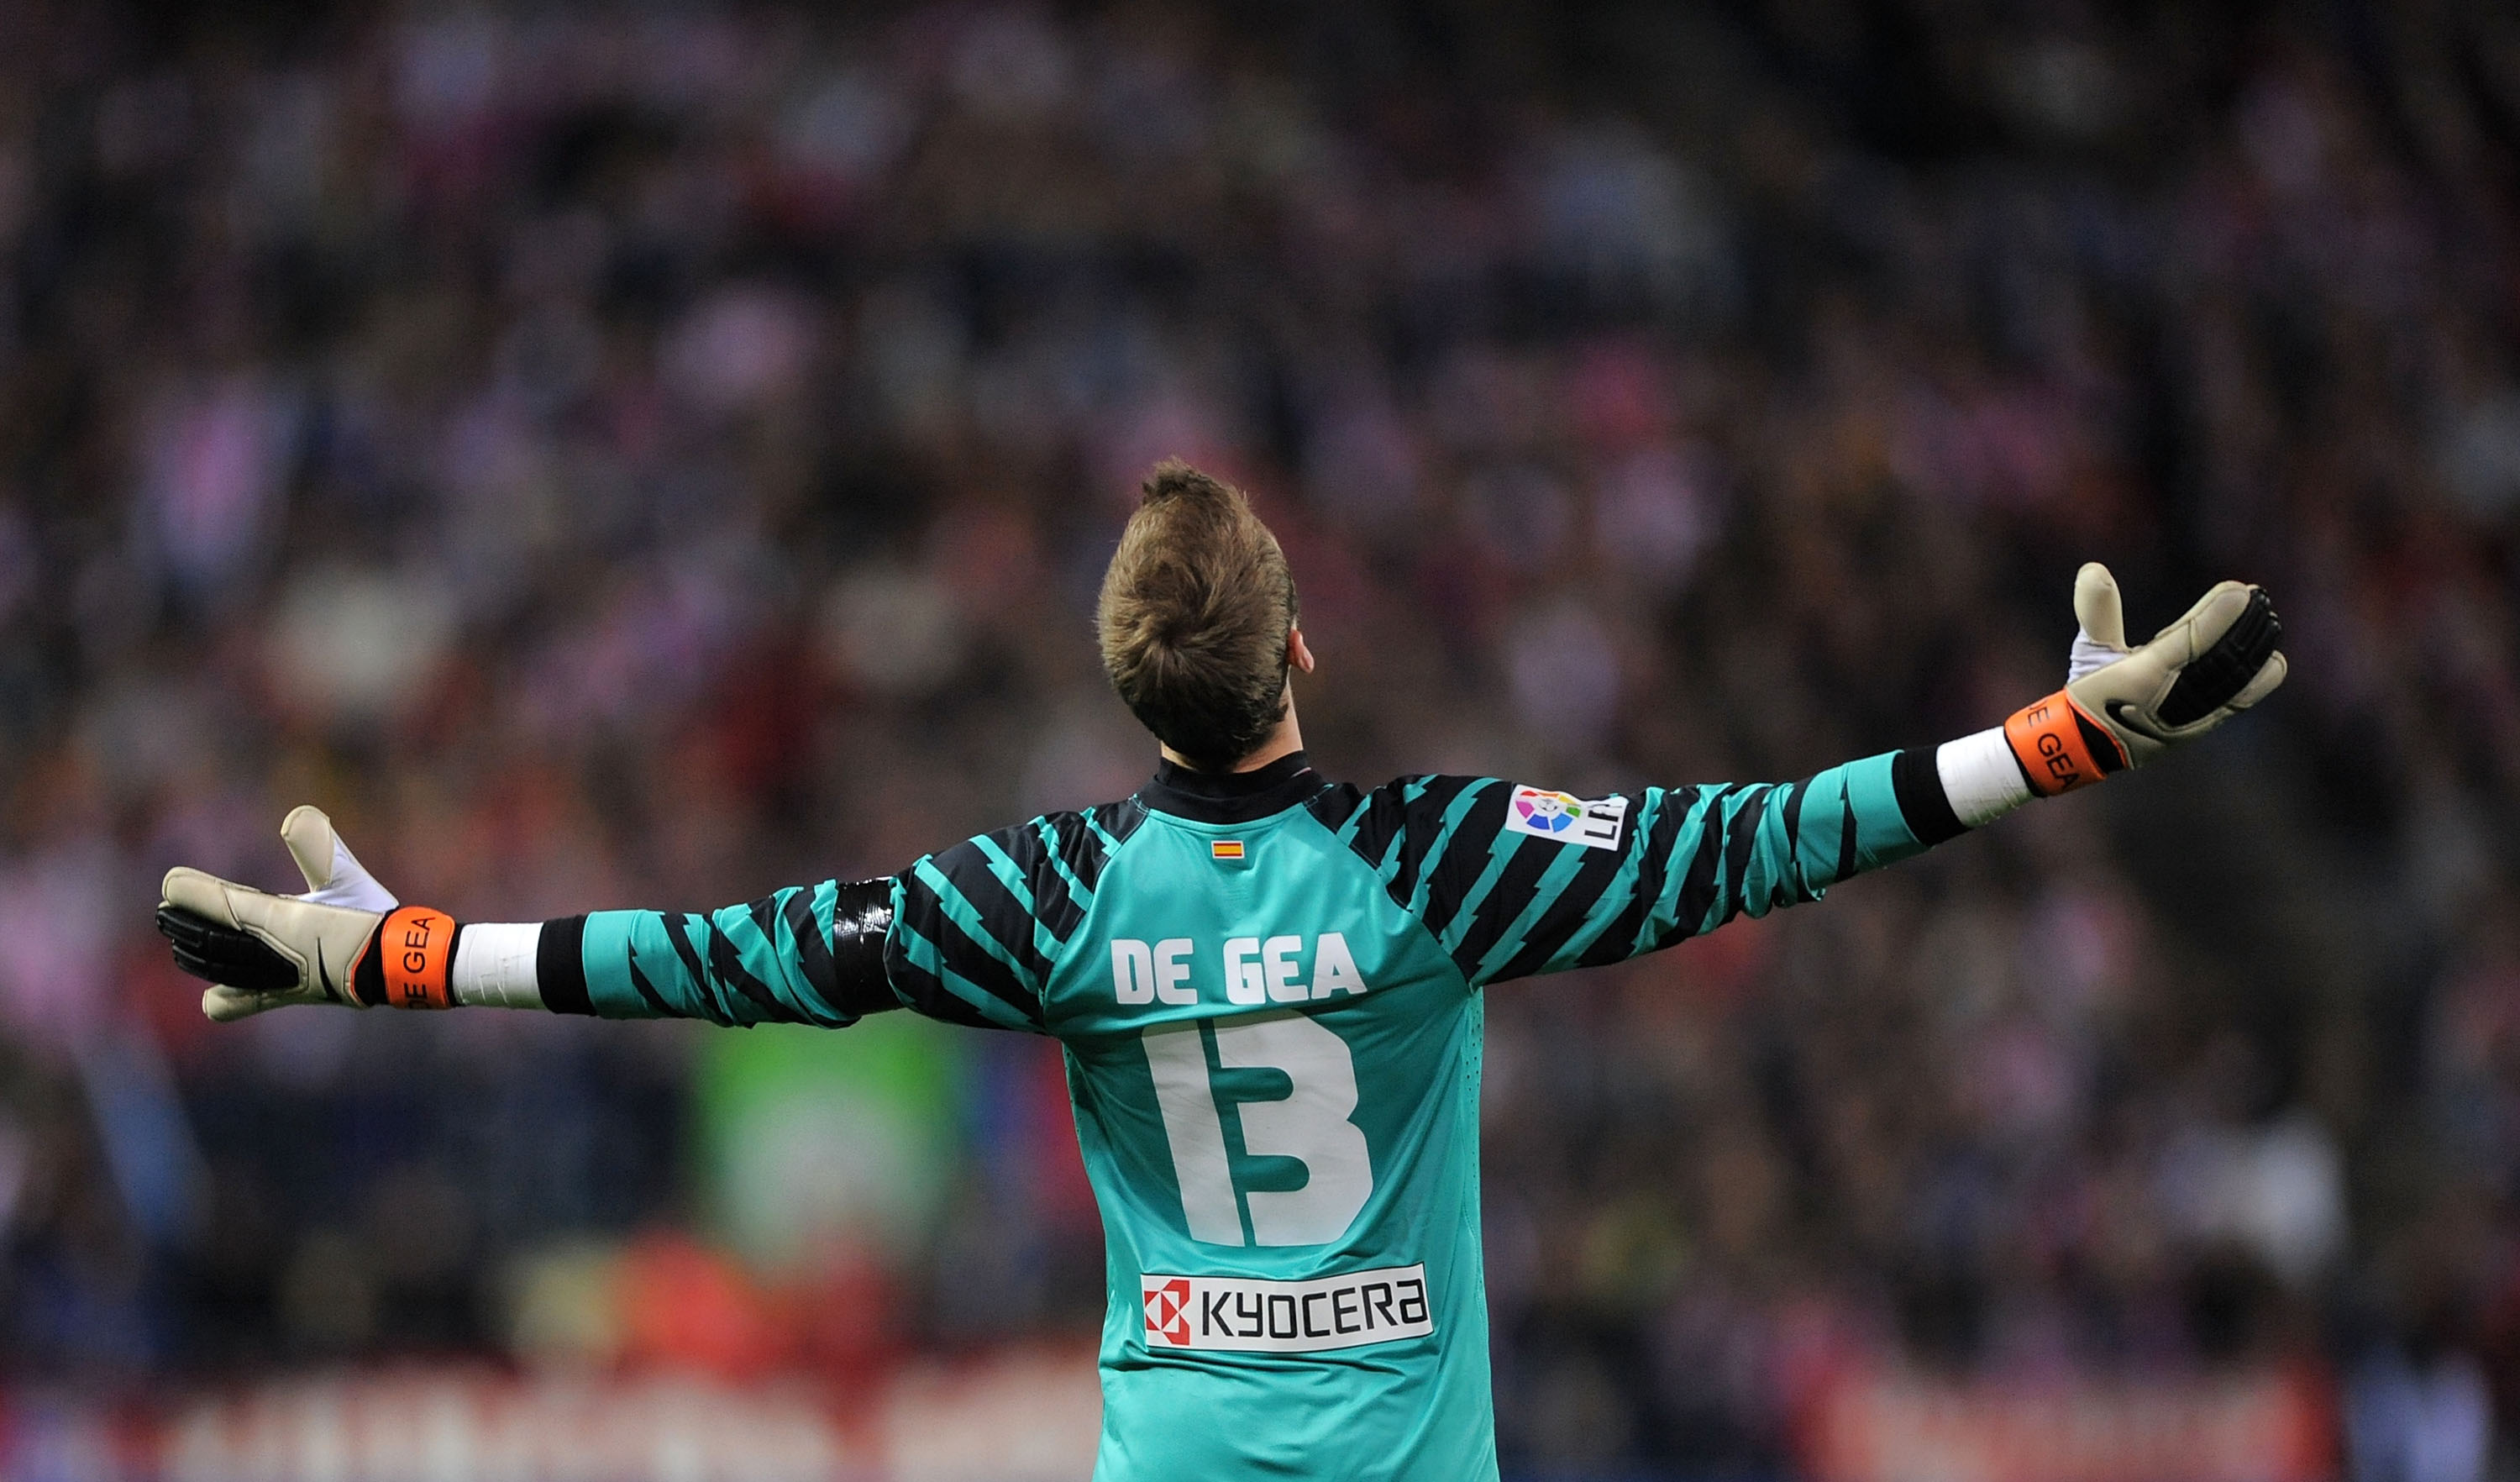 If he is emploring the heavens for a transfer, David De Gea's prayers well be answered